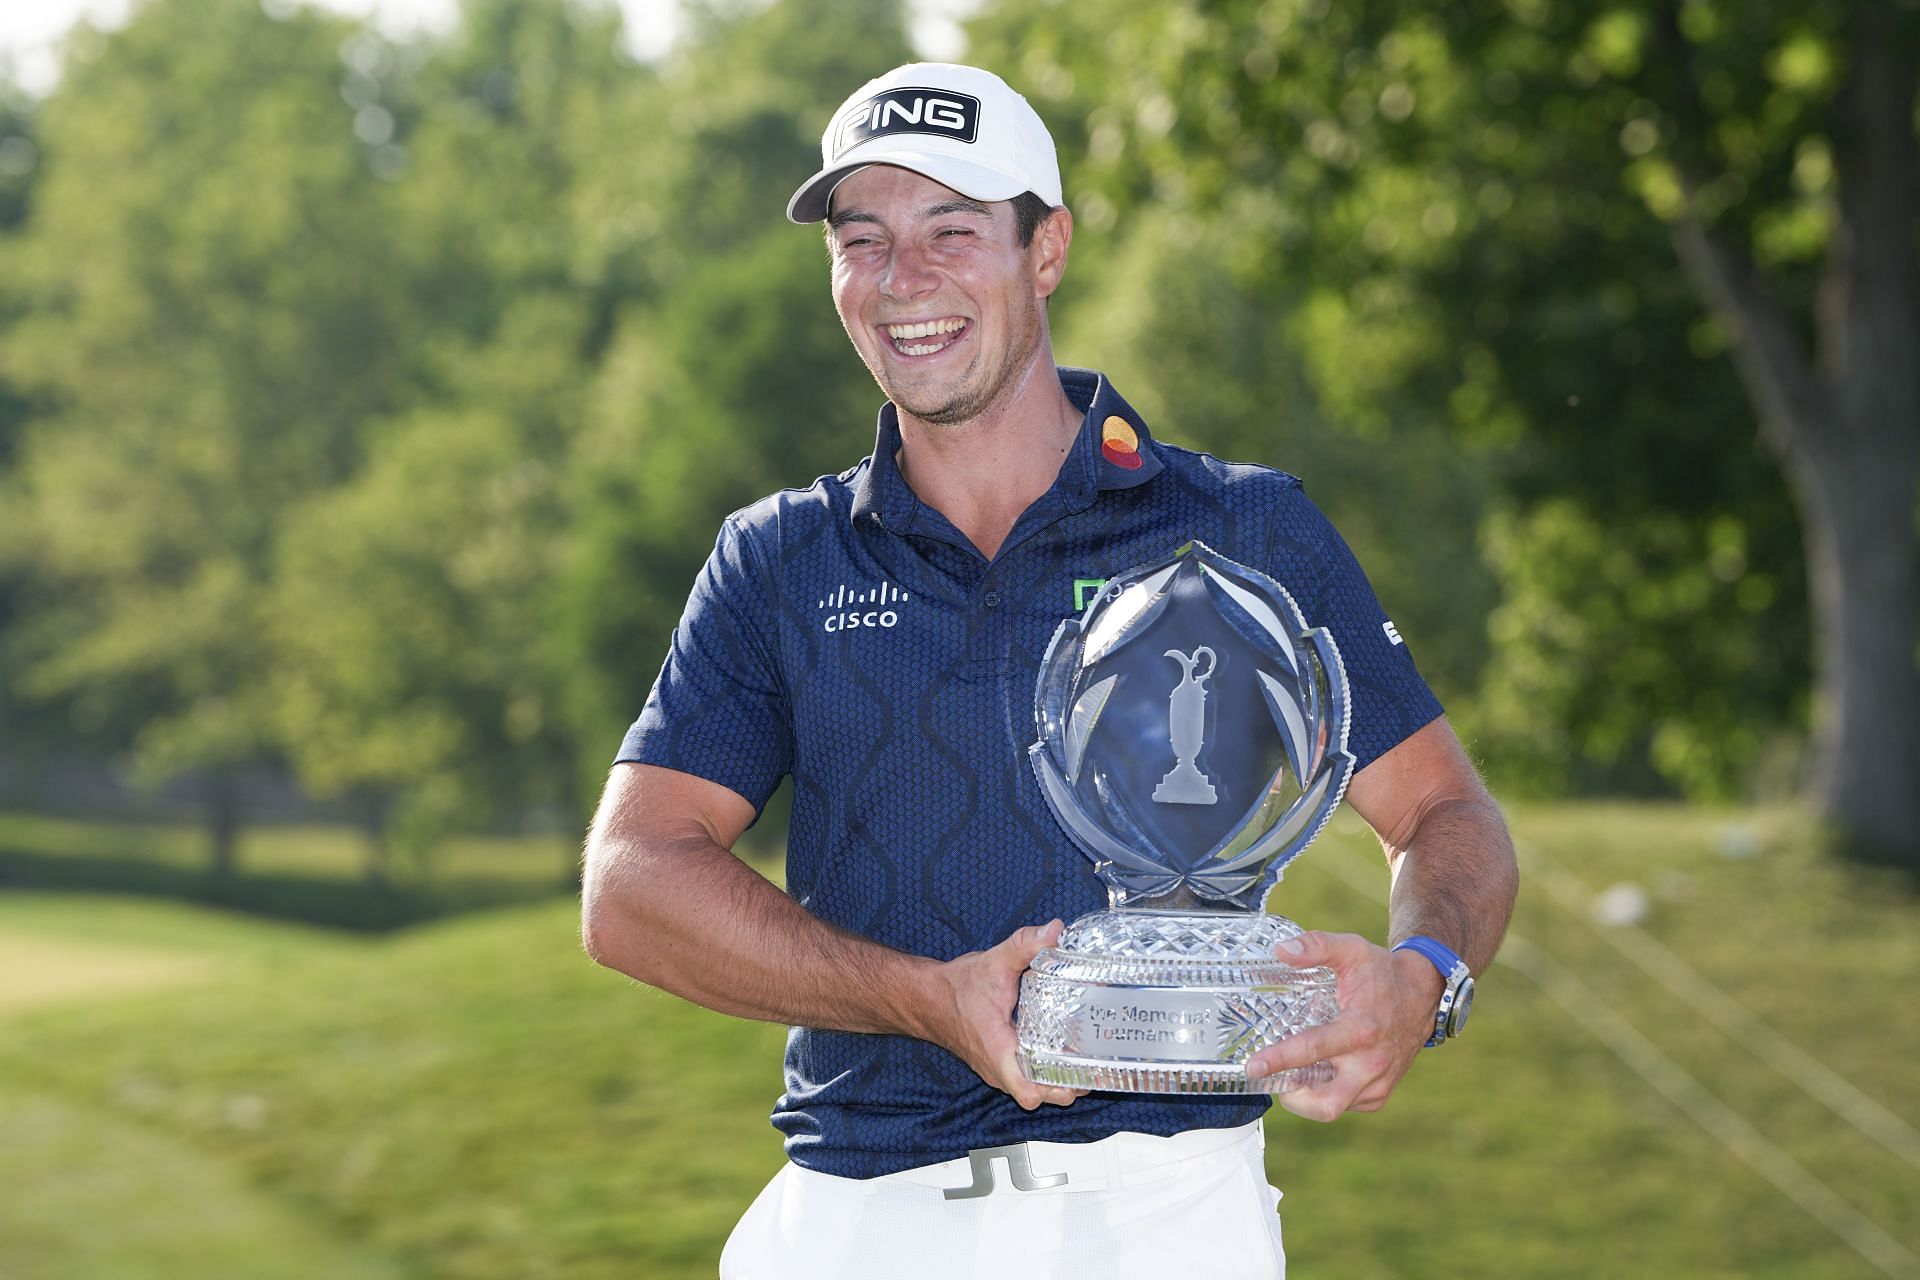 How much has Viktor Hovland earned from the PGA Tour? Memorial